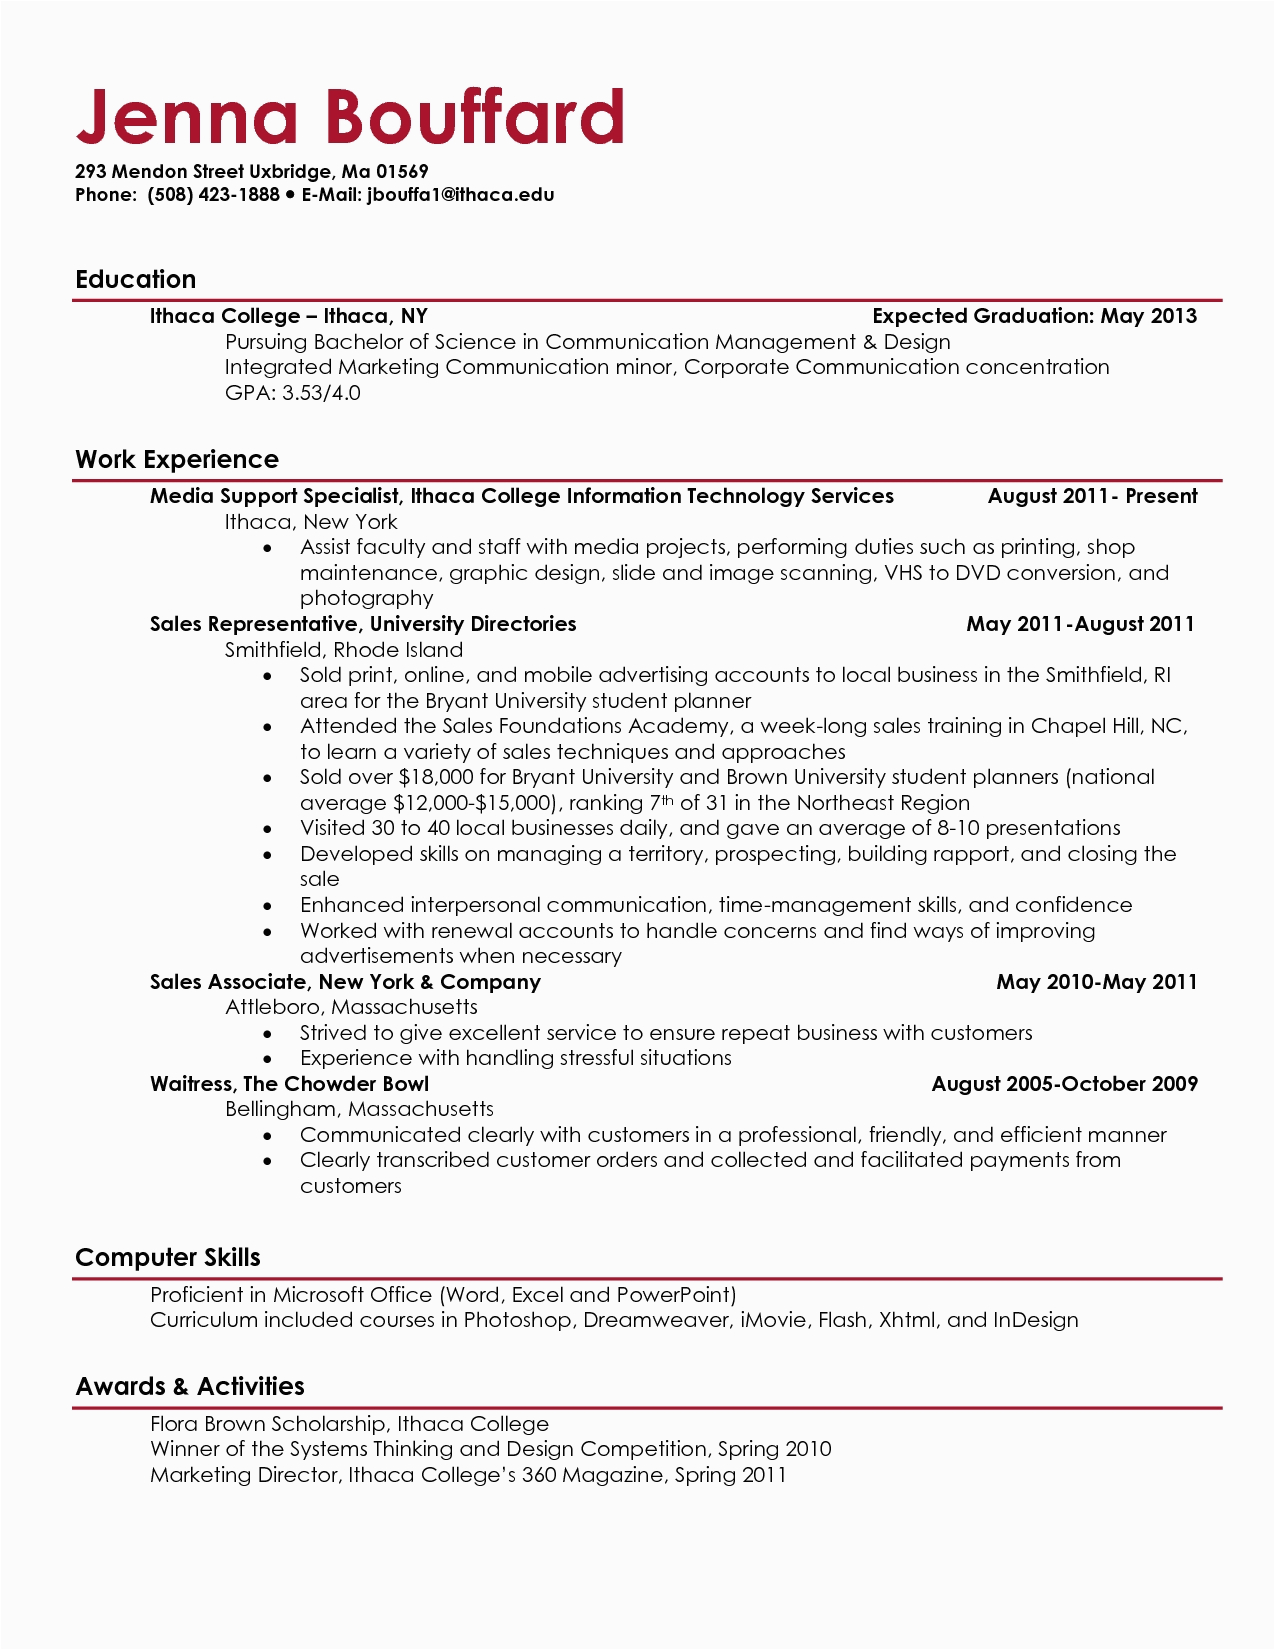 Professional Resume Template for College Students College Student Resume Examples